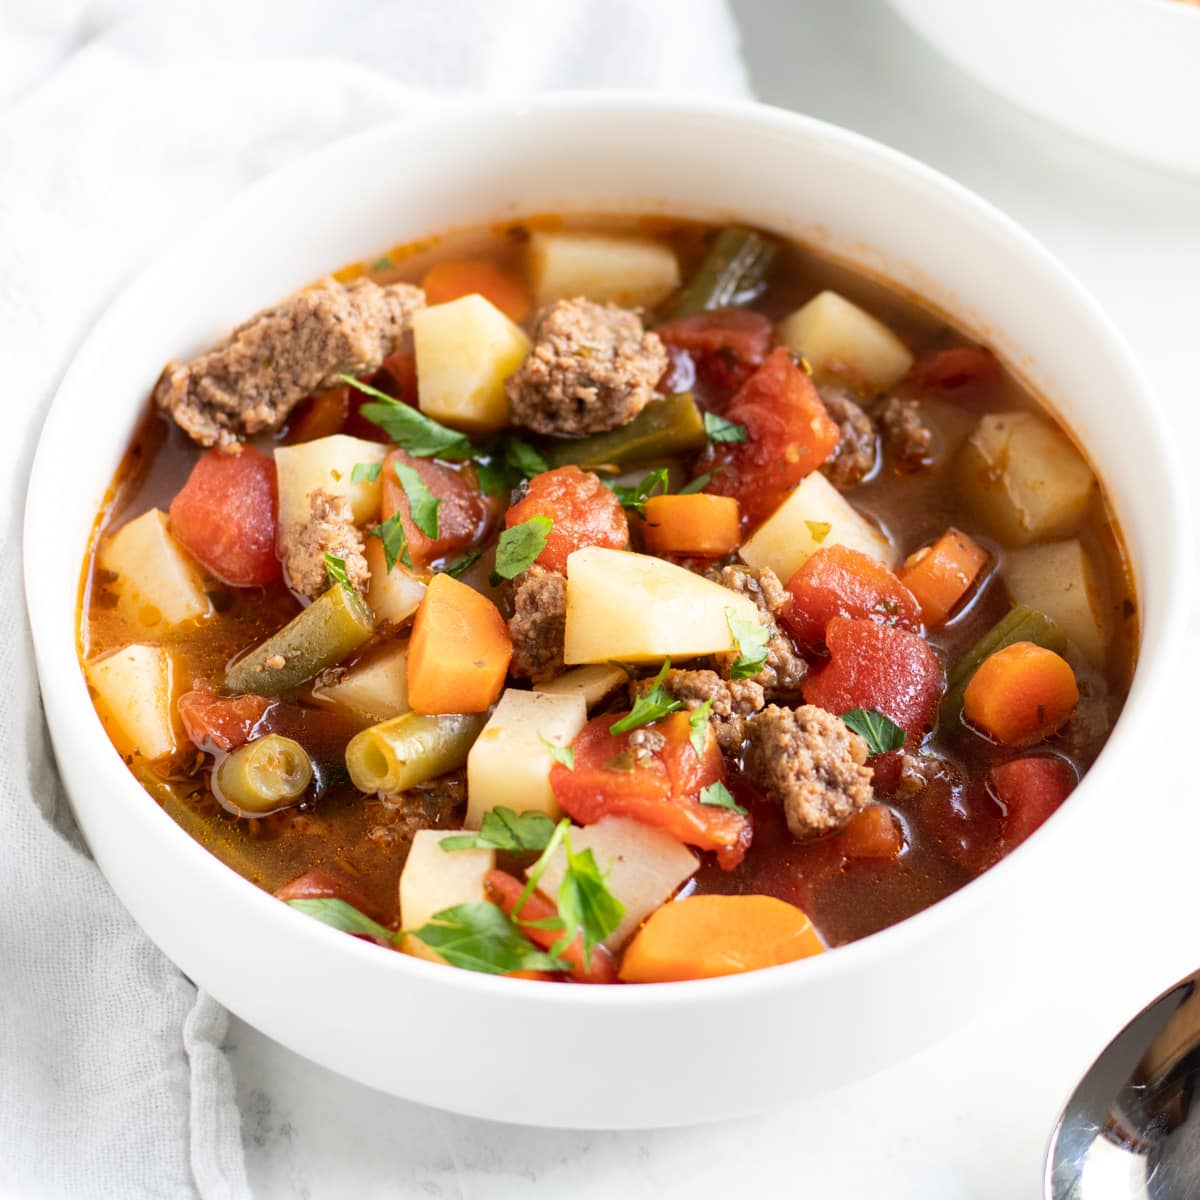 A bowl of soup made with ground beef, potatoes, carrots, tomatoes, and green beans.